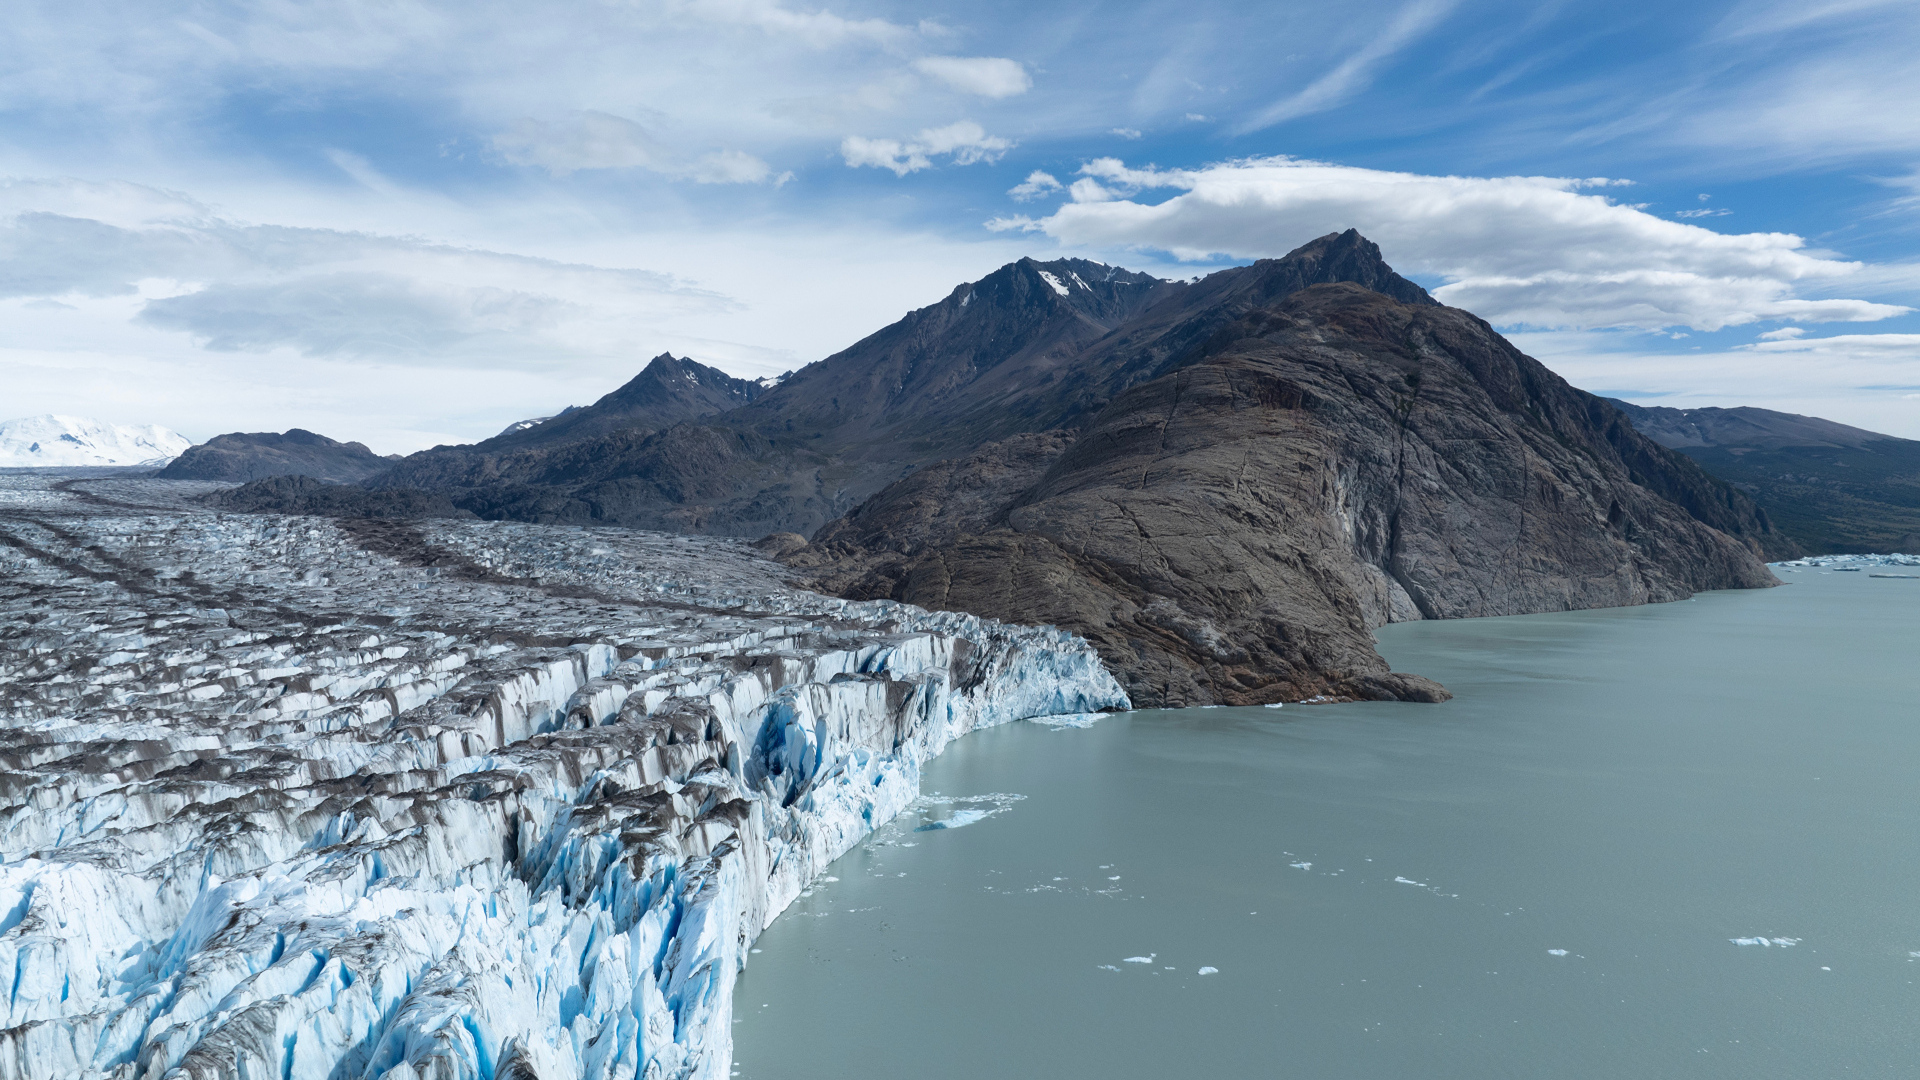 View of a glacier in the mountains, Argentina